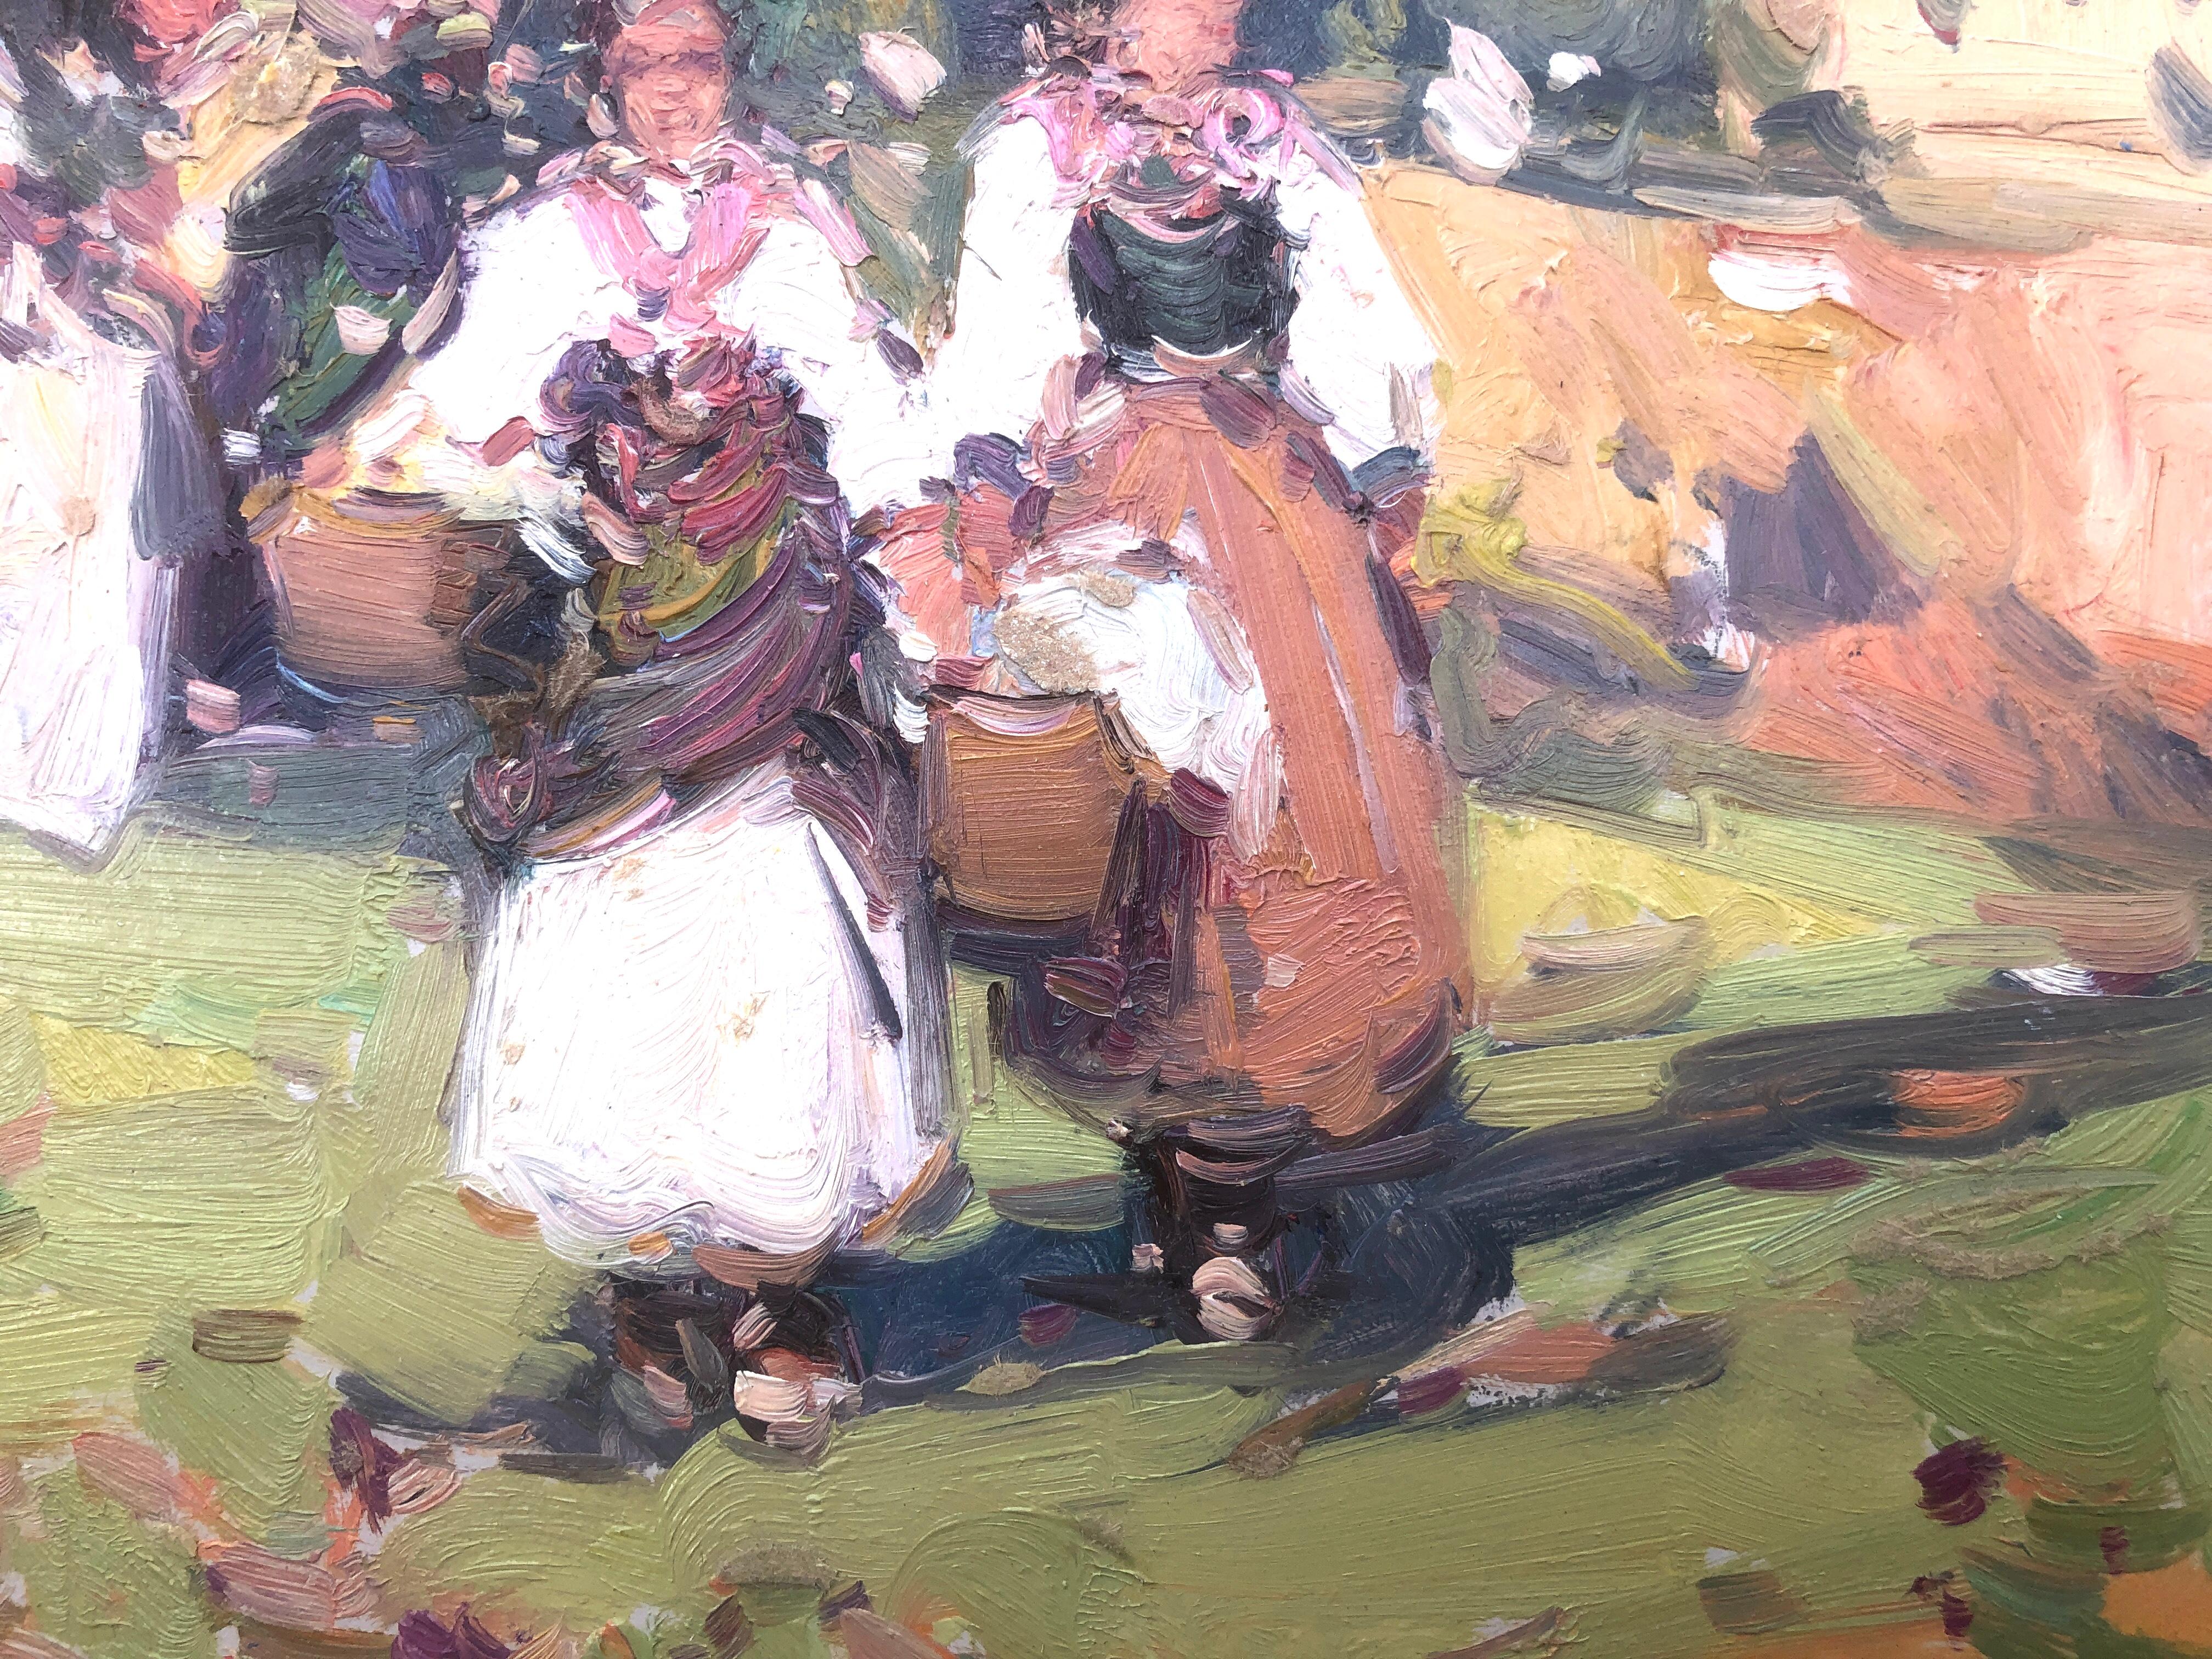 Women of Ibiza Spain oil on board painting - Post-Impressionist Painting by Gabriel Casarrubios